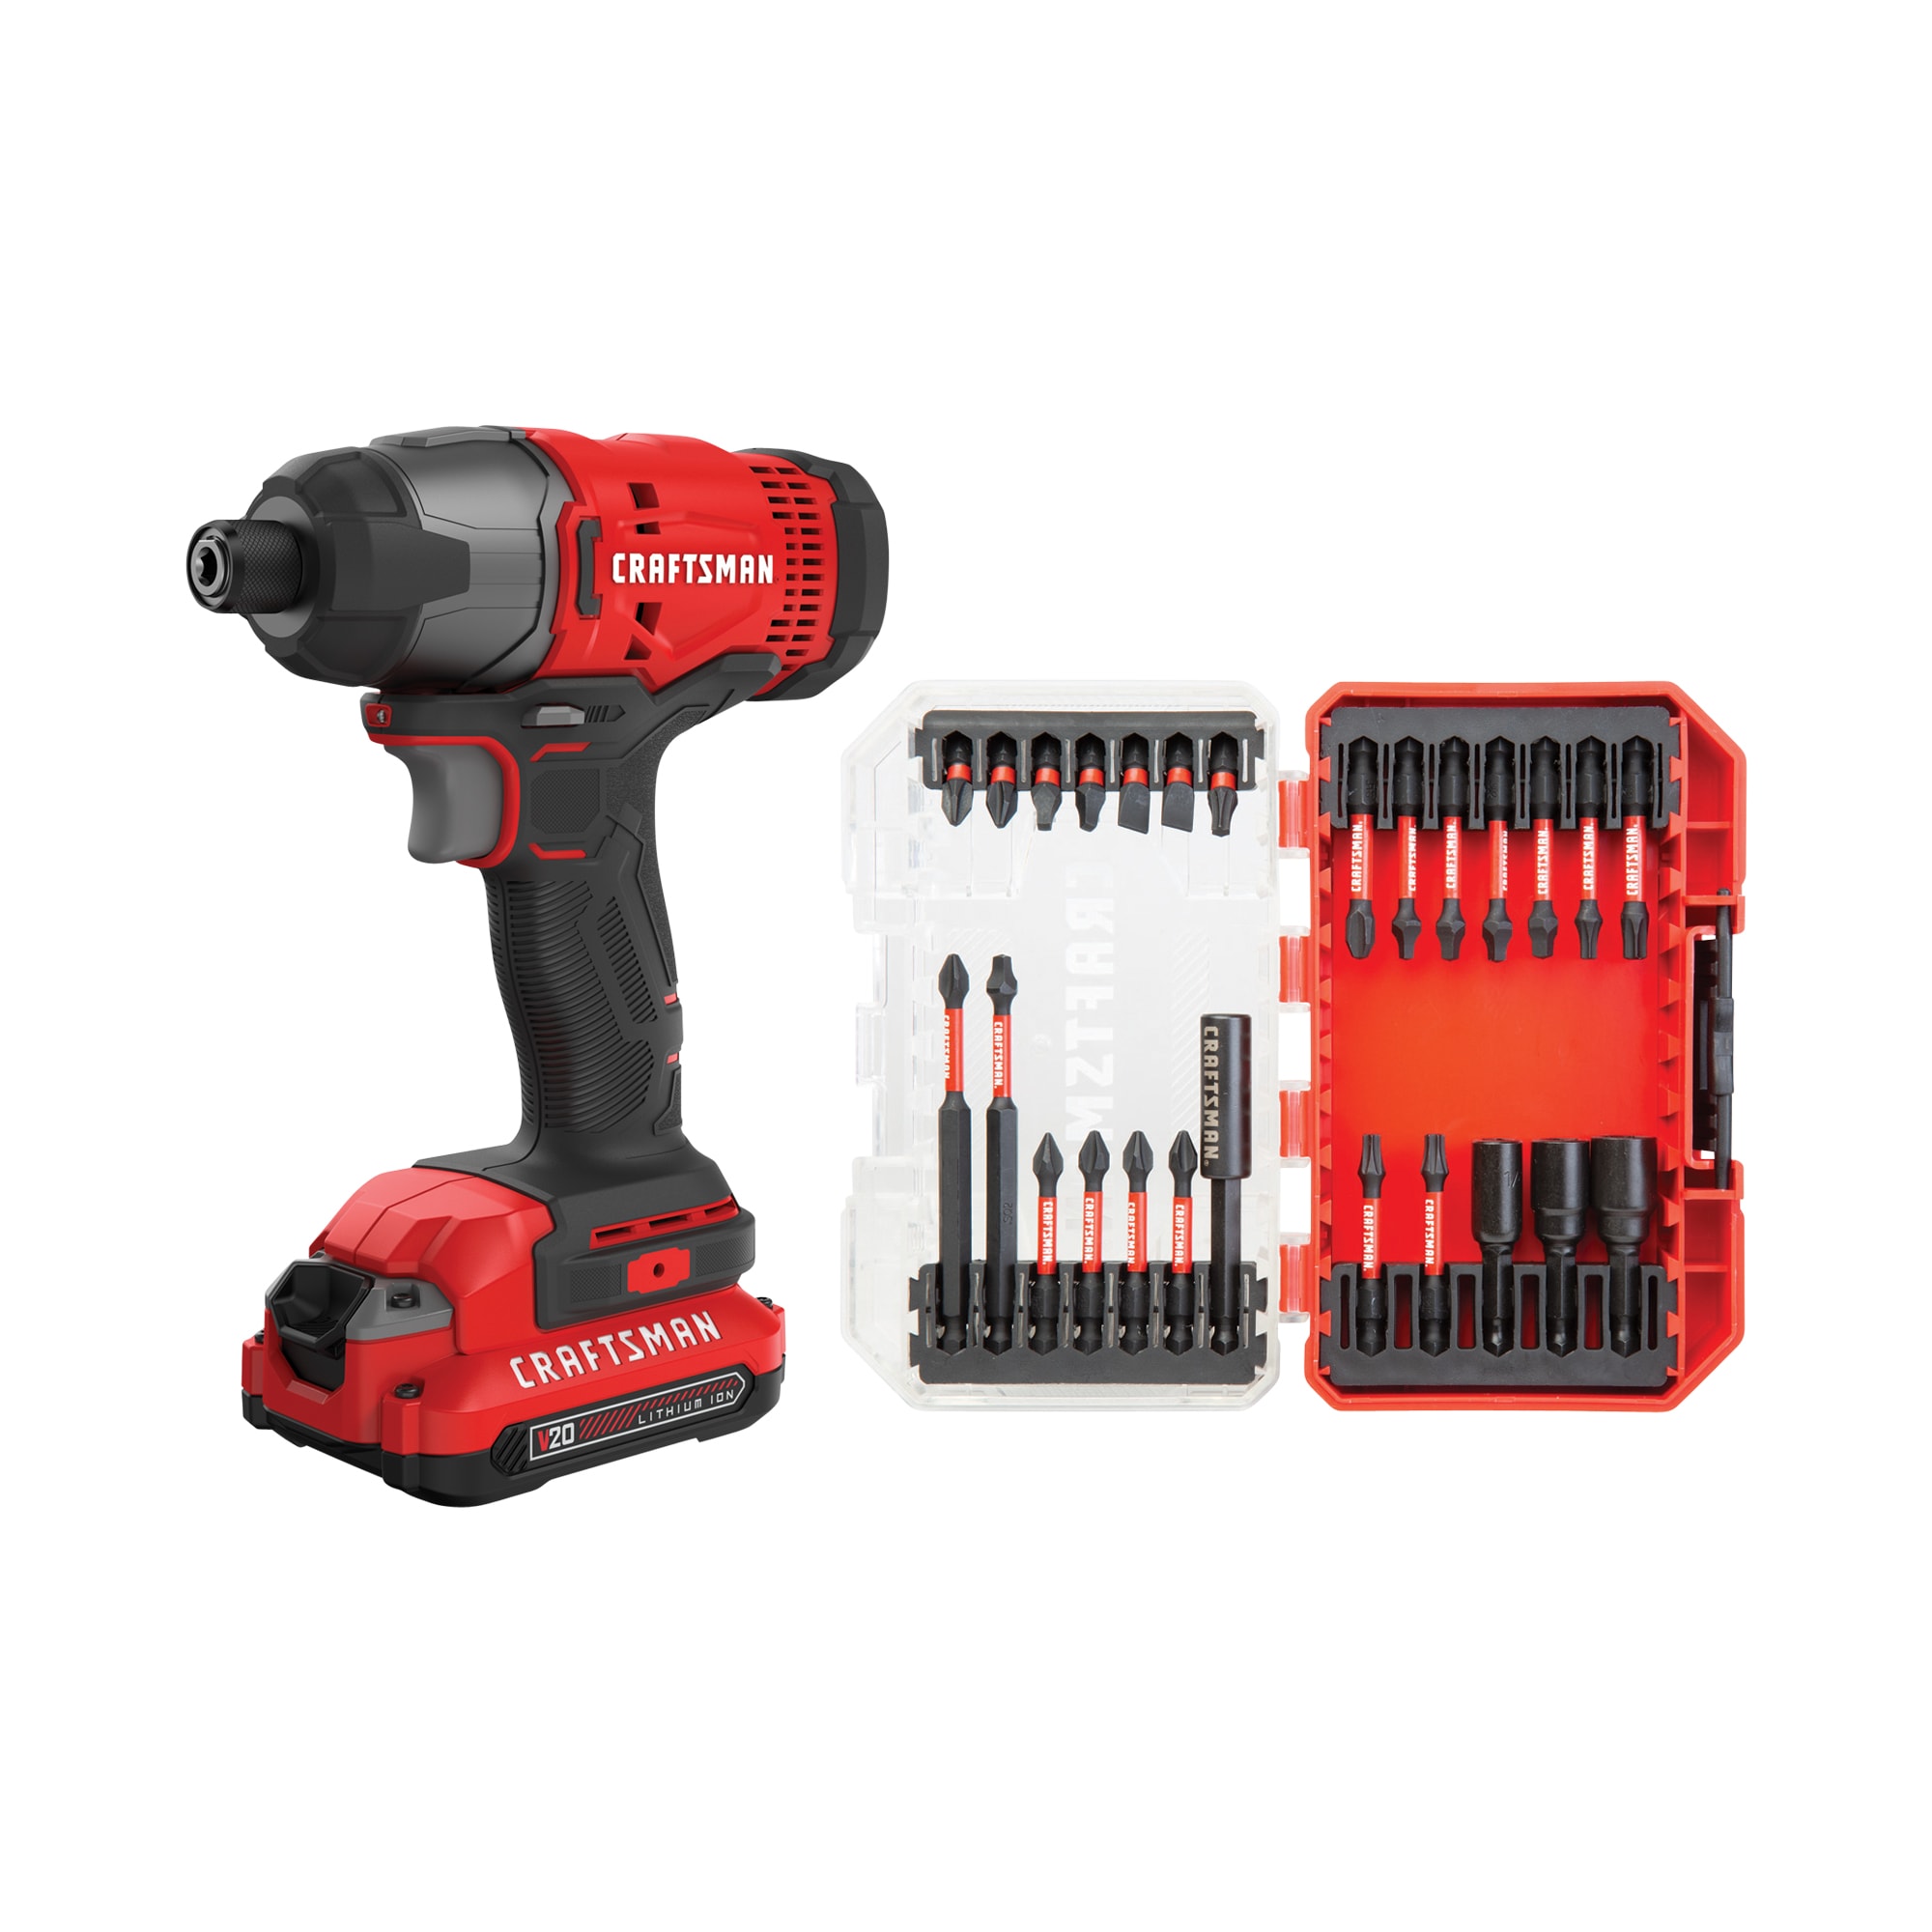 CRAFTSMAN 20-Volt Max 1/4-in Variable Speed Cordless Impact Driver (1-Battery Included) & Impact-Rated 26-Piece Impact Driver Bit Set